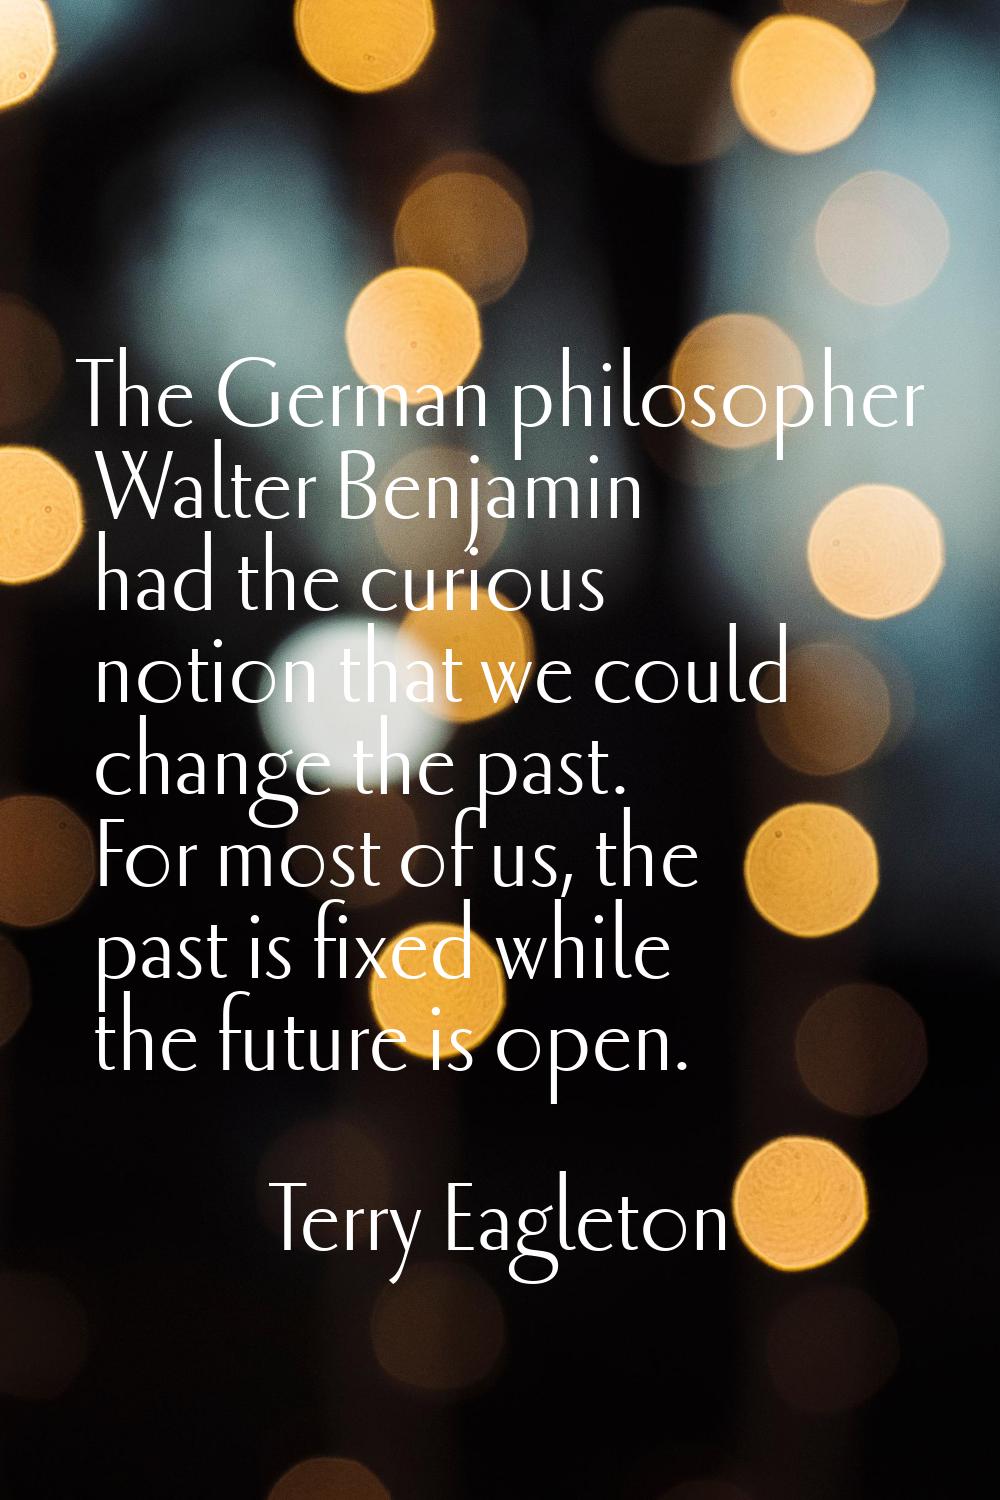 The German philosopher Walter Benjamin had the curious notion that we could change the past. For mo